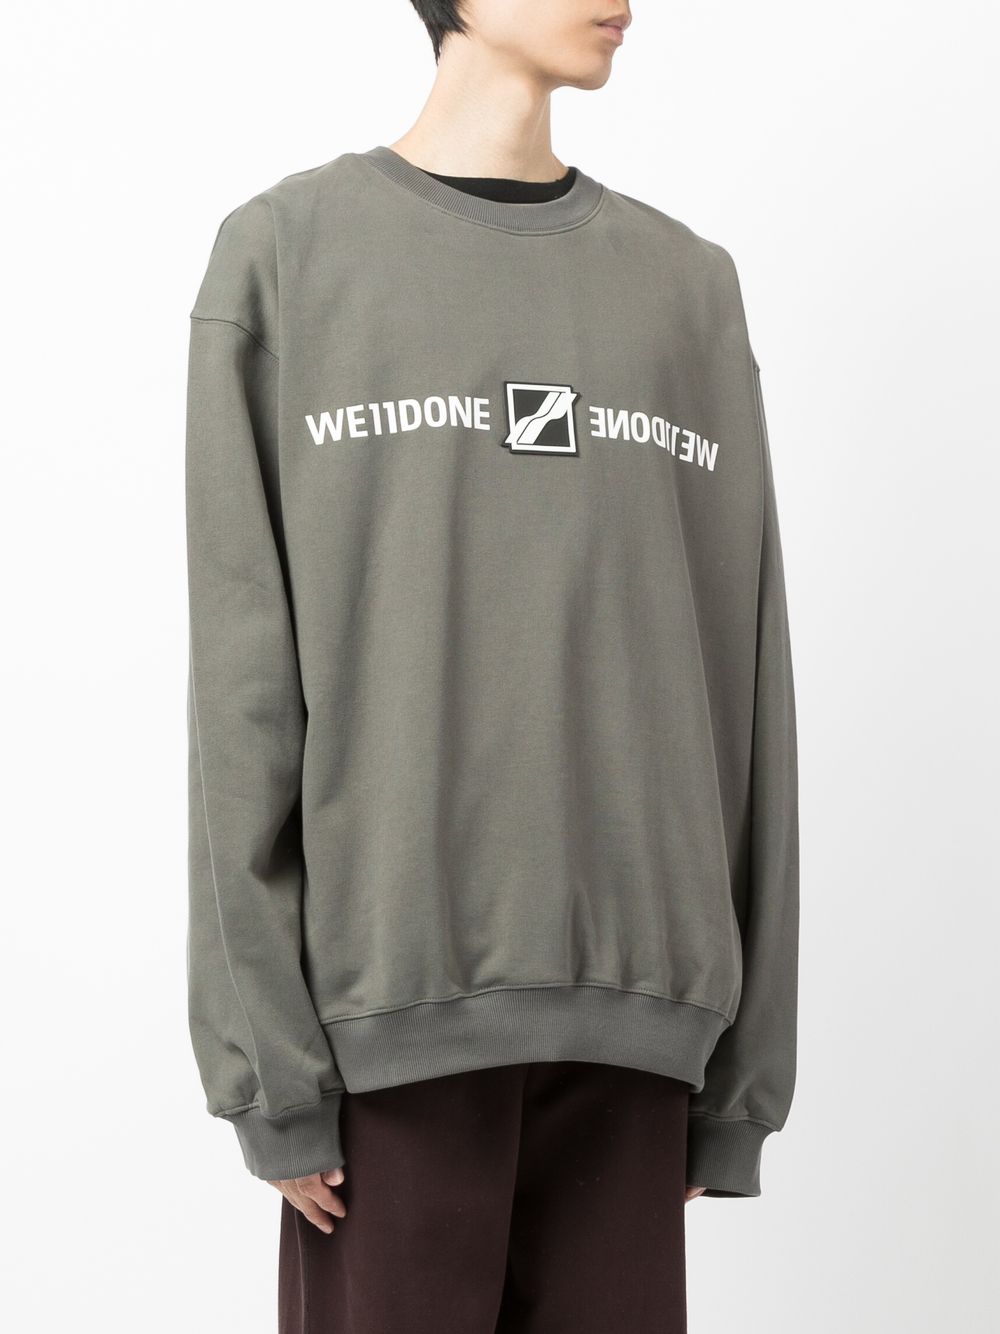 Shop We11done logo-print sweatshirt with Express Delivery - FARFETCH